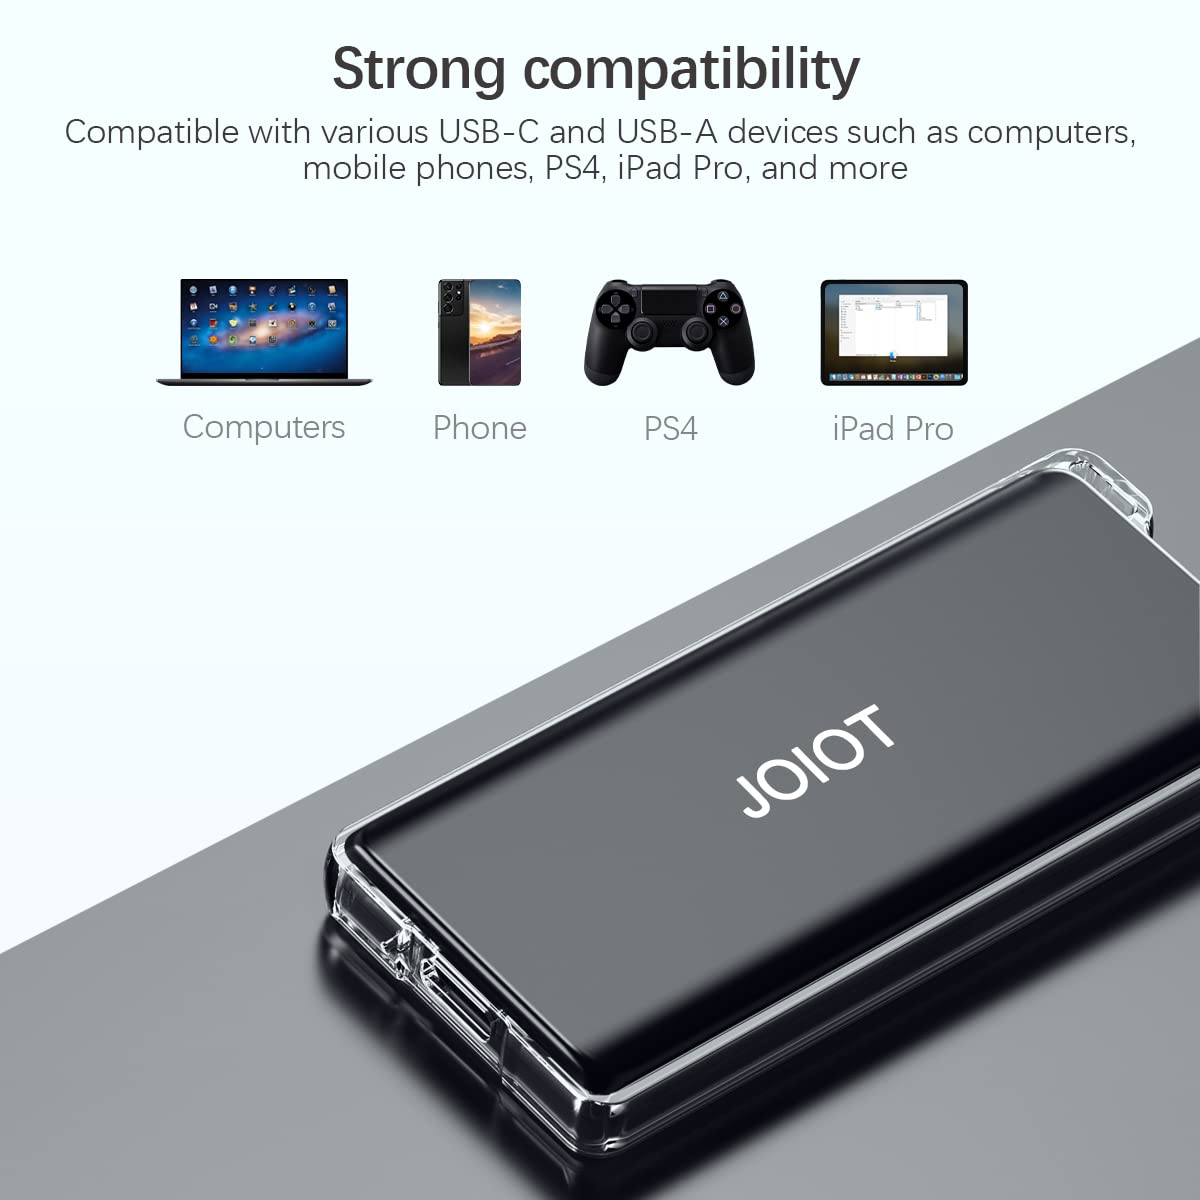 JOIOT 1TB Portable External SSD - Up to 500MB/s, USB 3.1 Type C Flash Drive External Solid State Drive, Portable SSD Type A to C Cable for PC/Laptop/Mac/Android/Linux